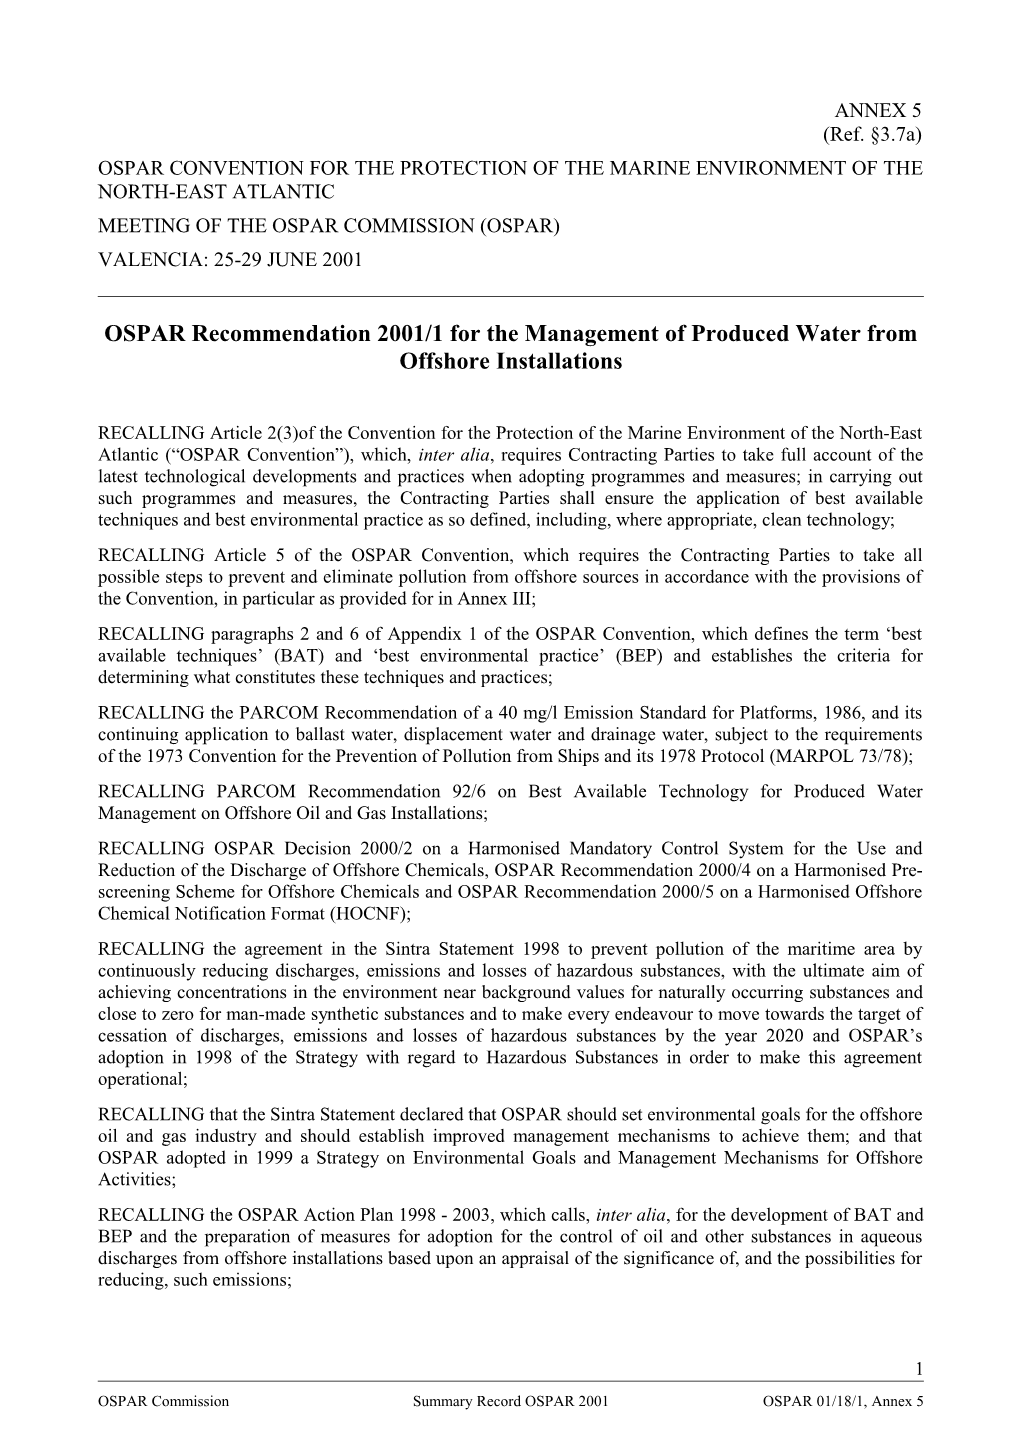 OSPAR Recommendation 2001/1 for the Management of Produced Water from Offshore Installations